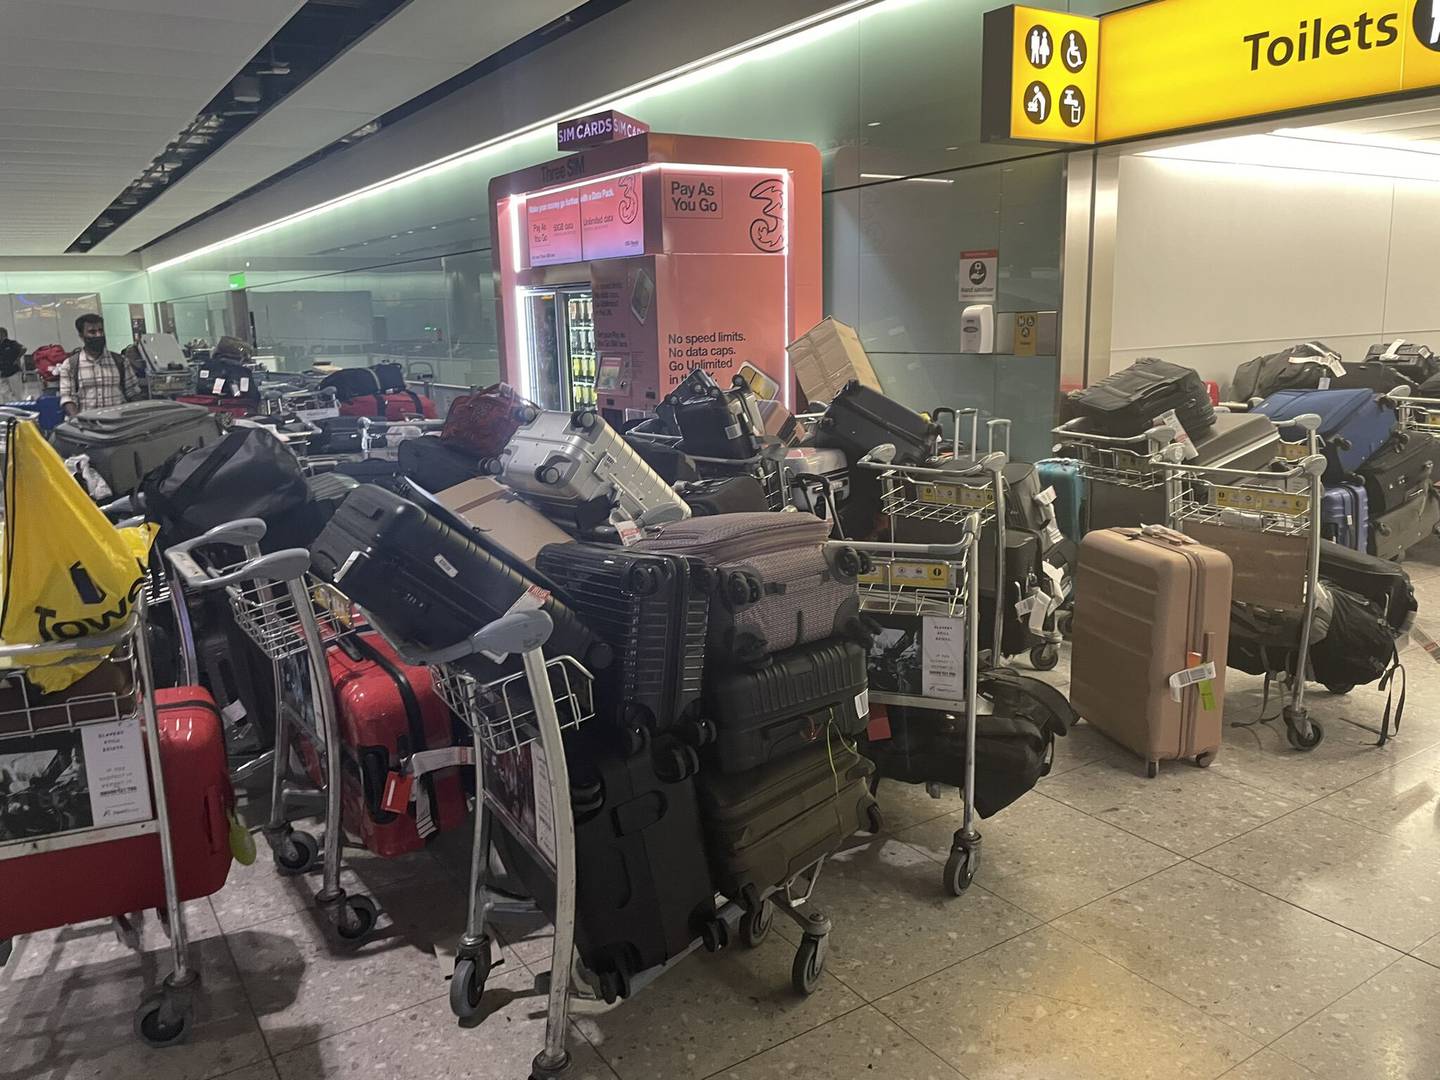 Baggage piled up at London's Heathrow Terminal 2 on June 19. PA